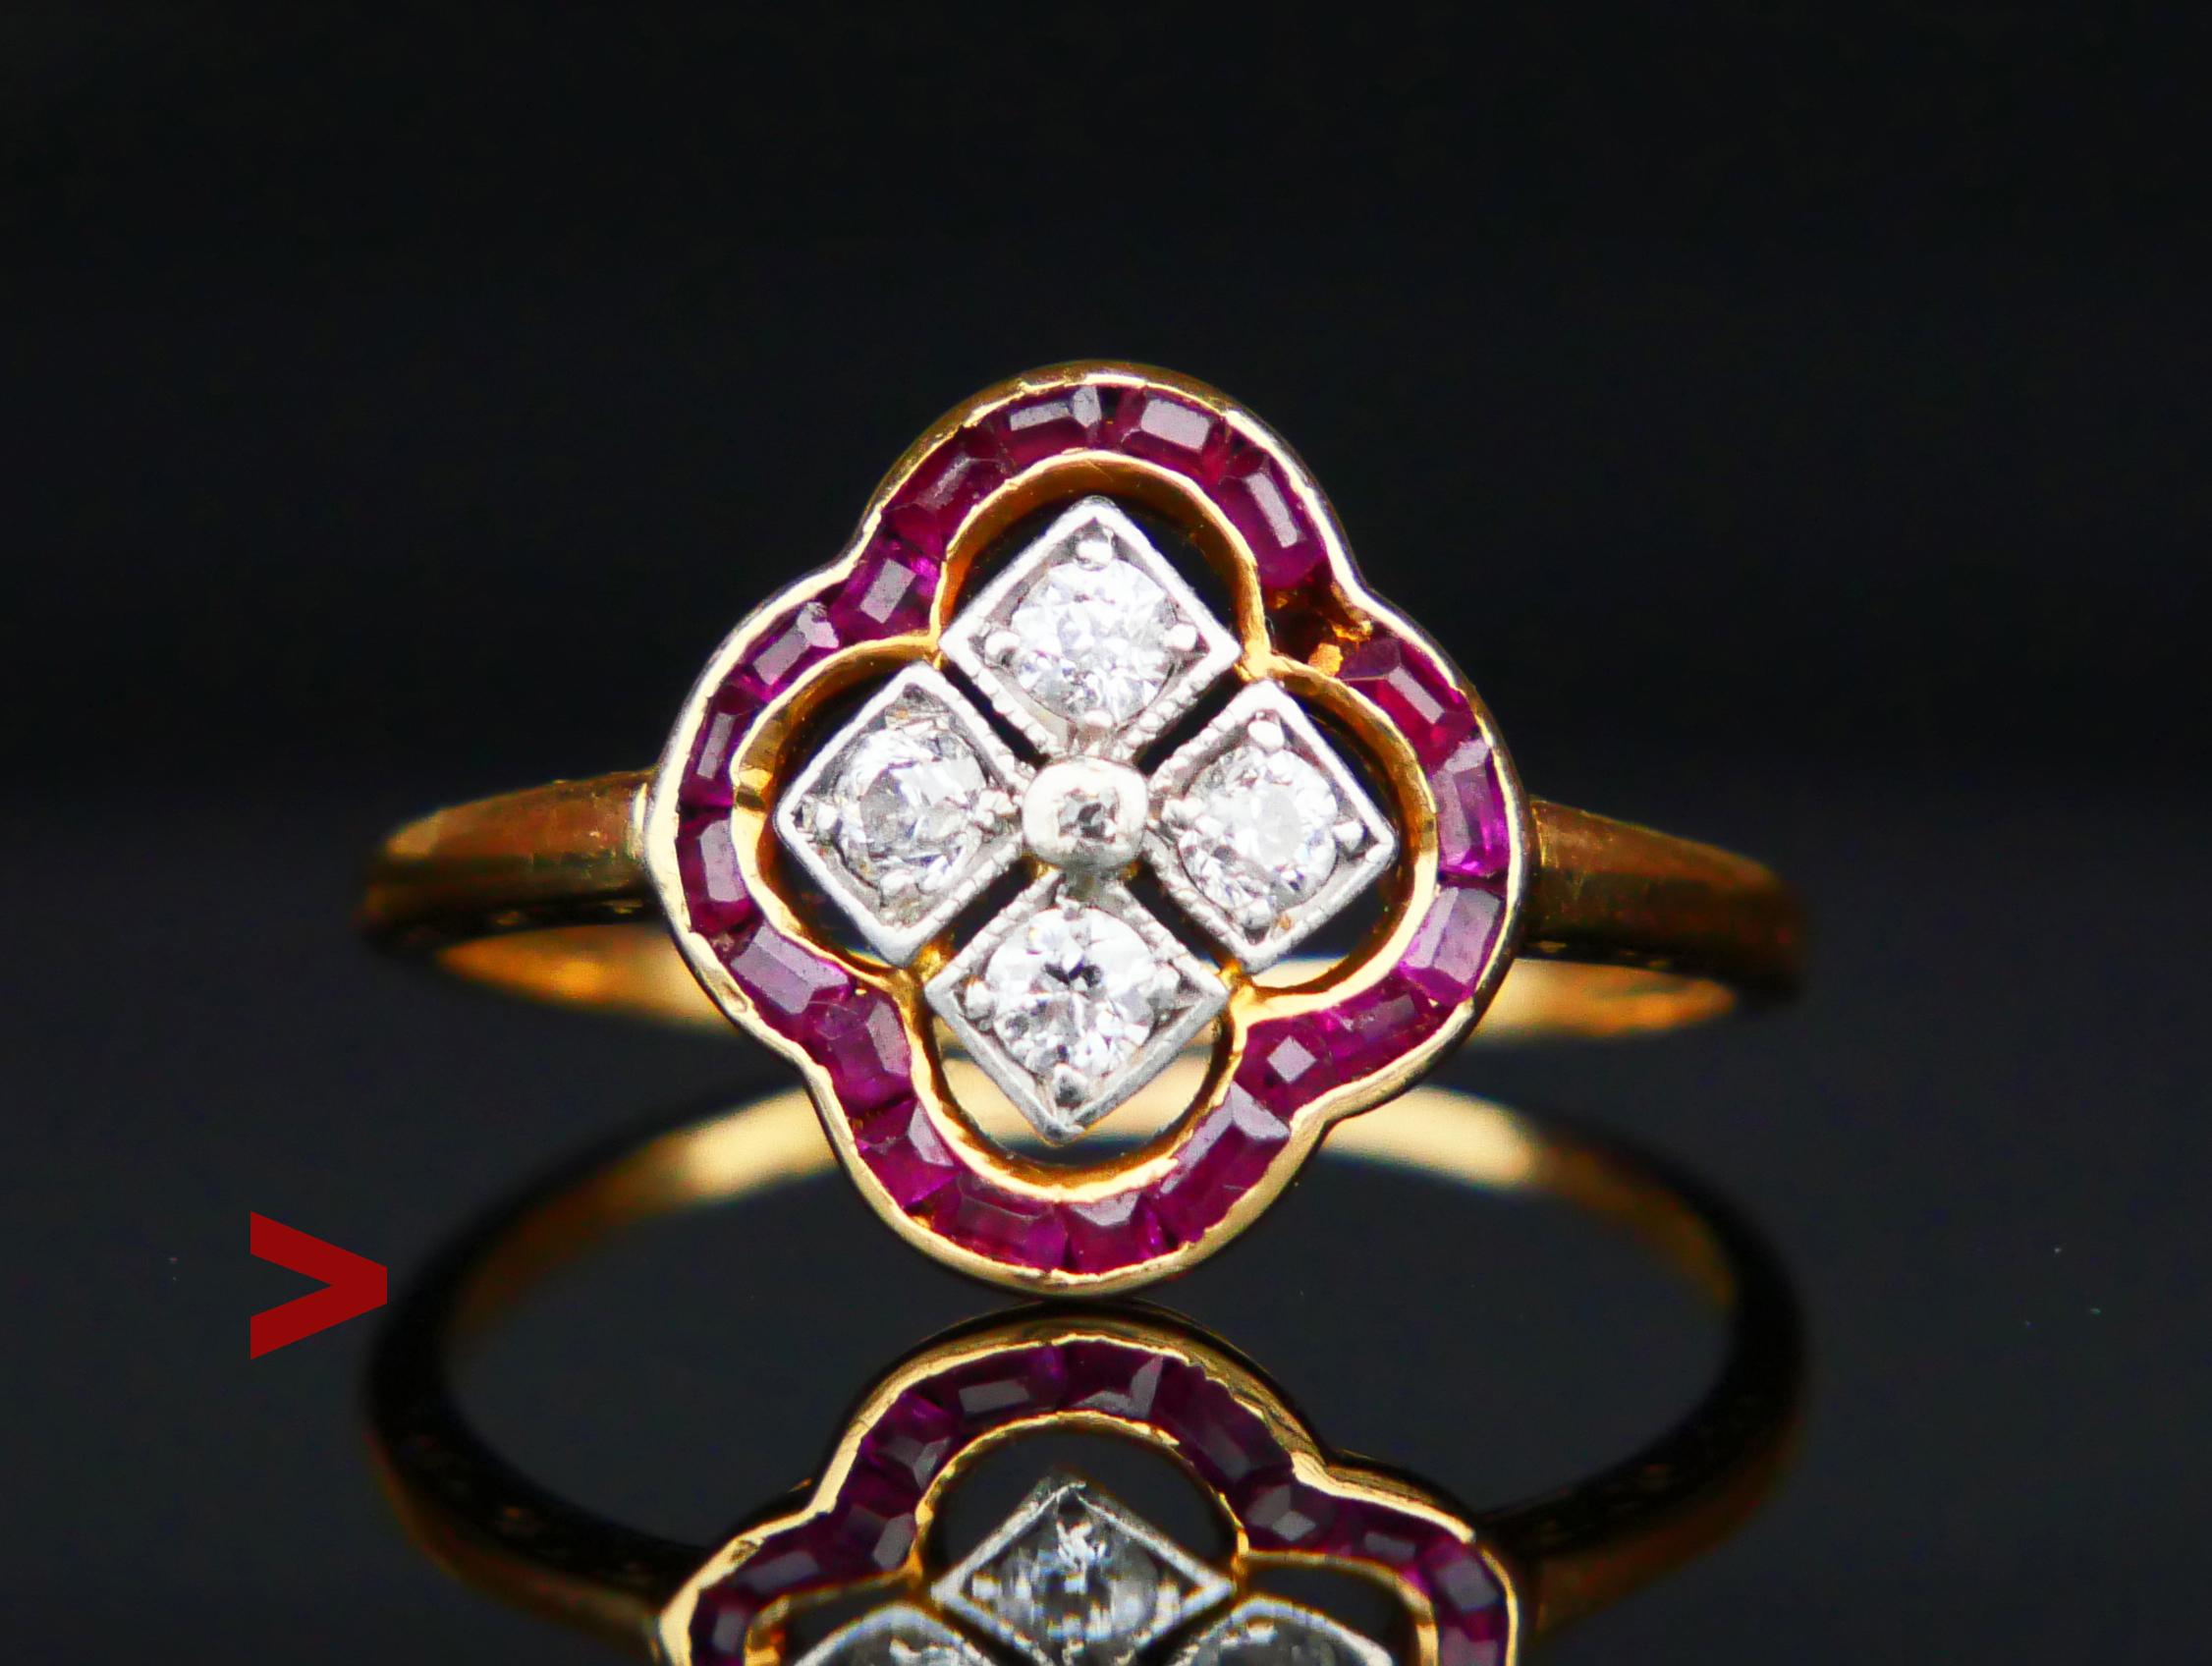 A Ring with openwork crown arranged with 19 care cut Rubies and 5 natural Diamonds in Platinum clusters.
Worn Swedish hallmarks: 18K, 3 crowns , maker's , year combination C7 = hand-made in 1905.
Floret / crown measures 14mm x 12.75 mm x 5.25mm